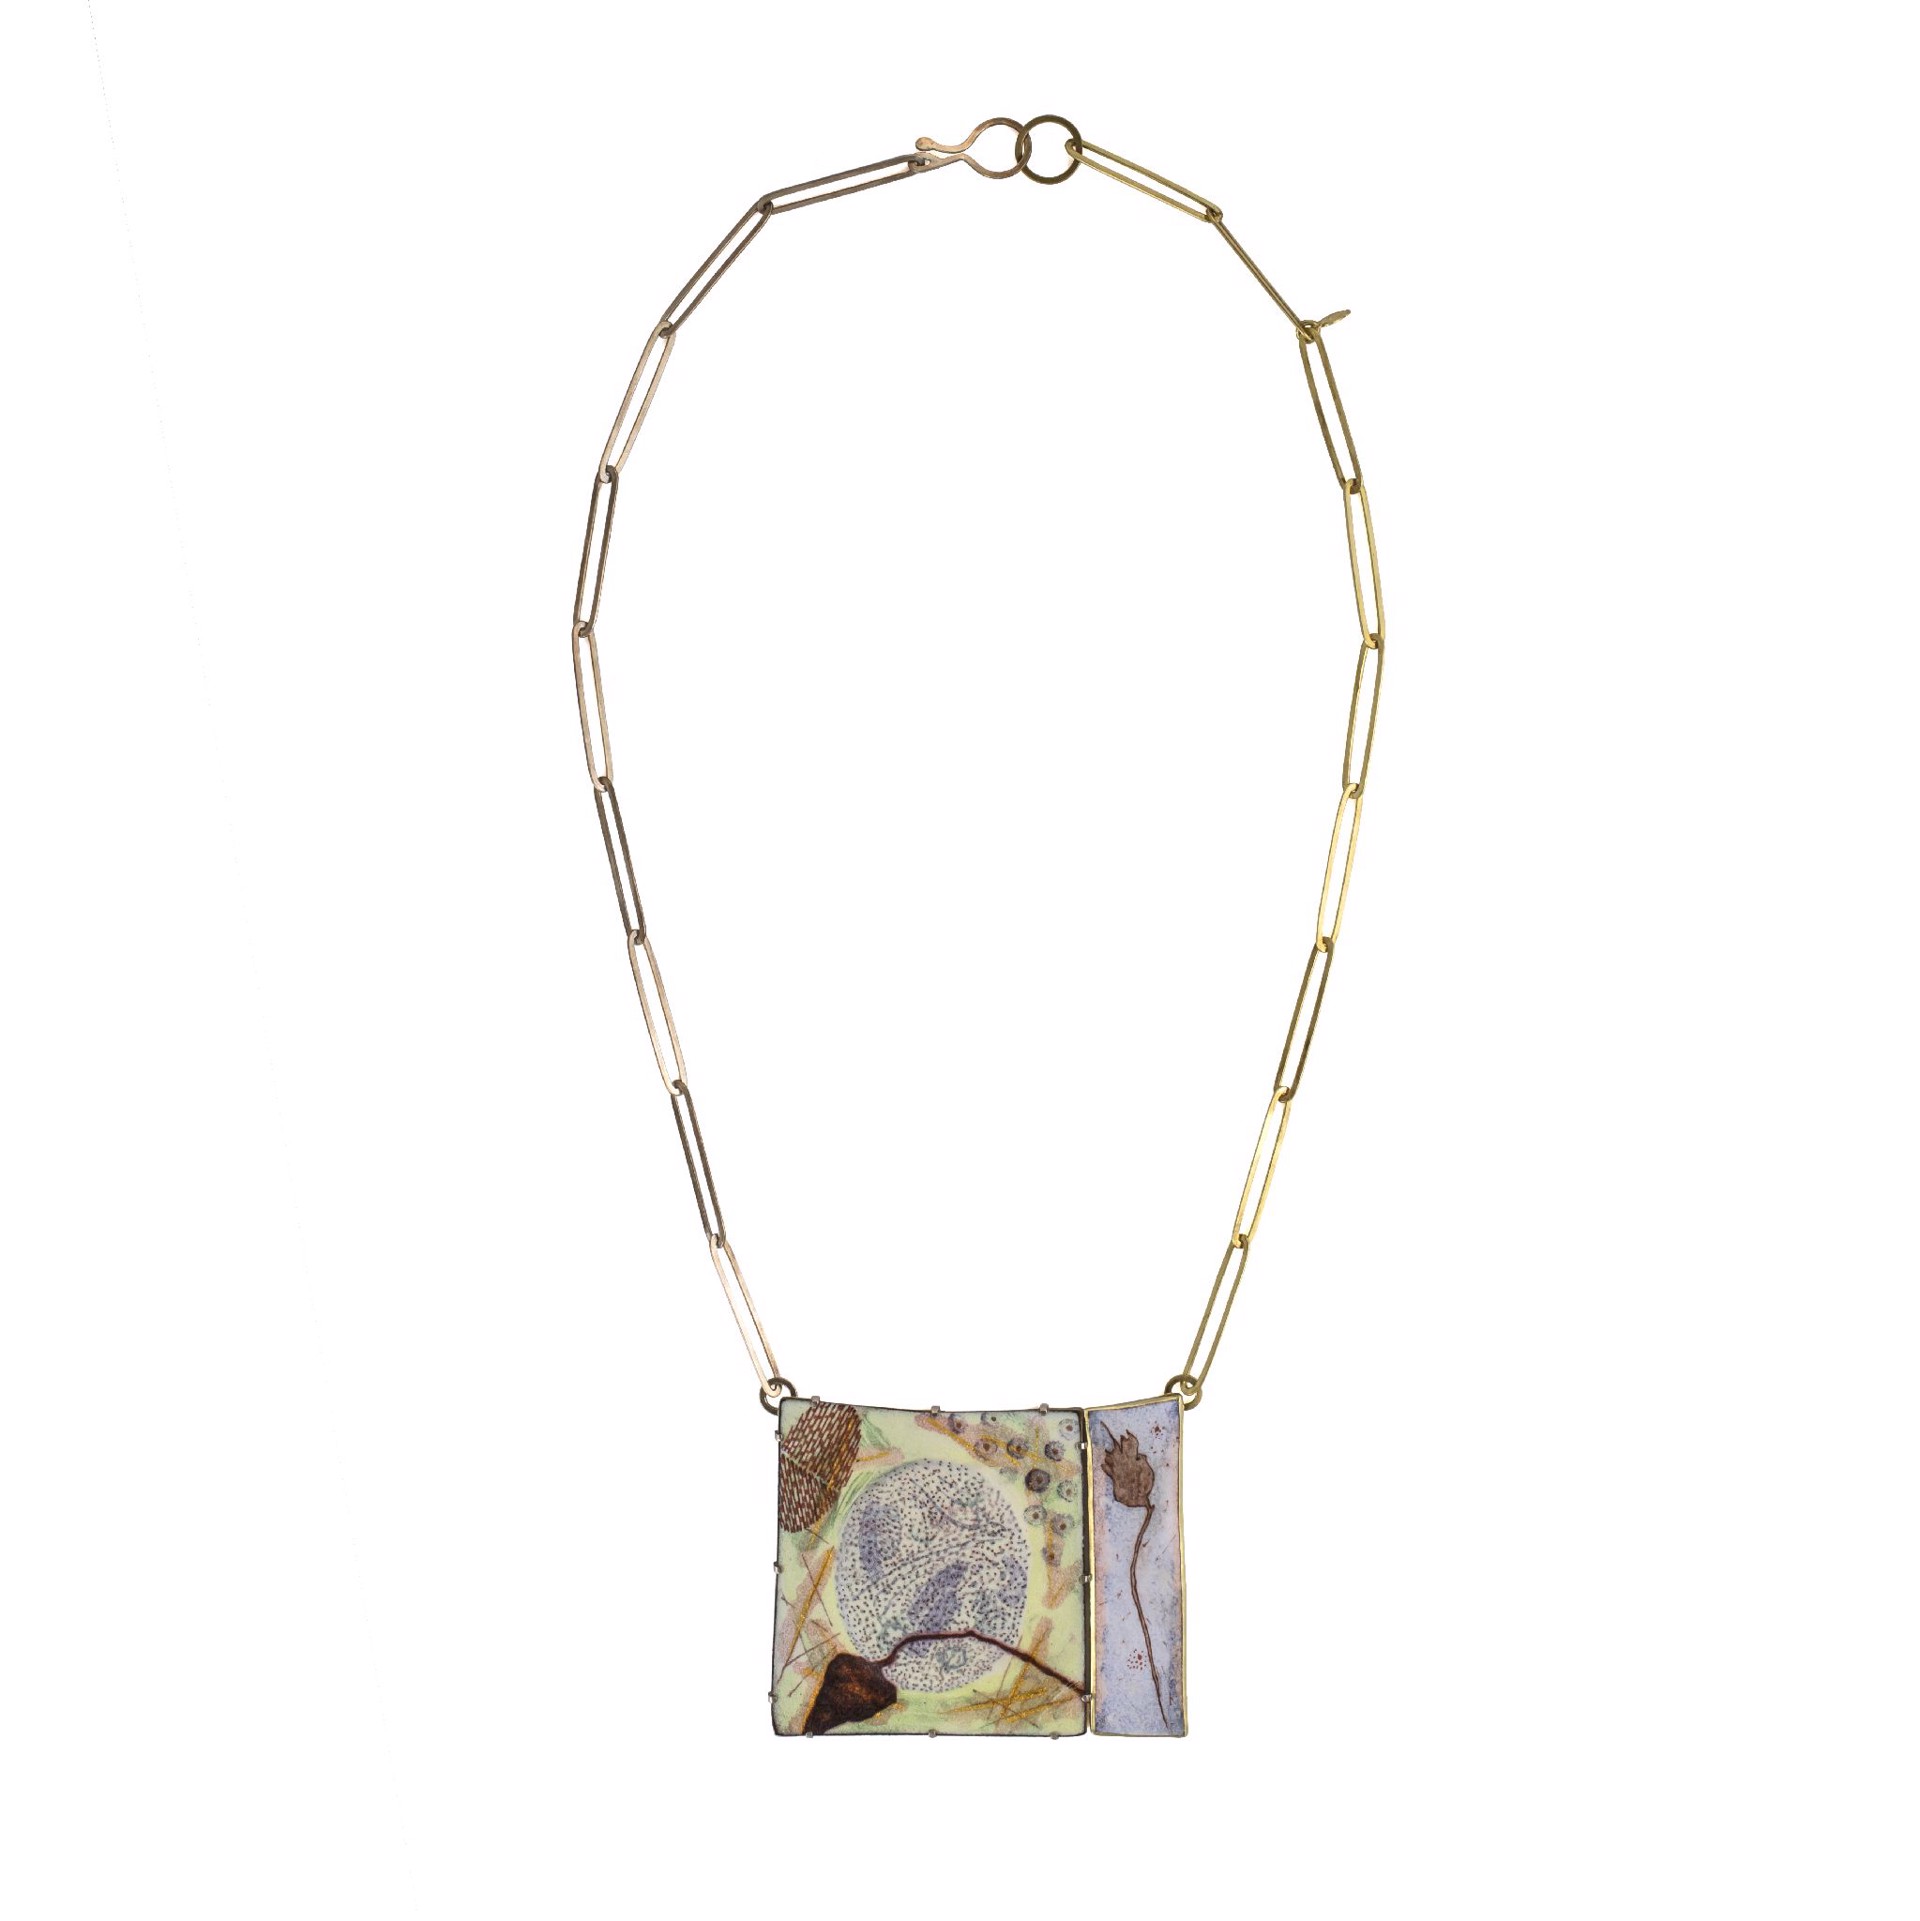 Periphery 16 Necklace by Jamie Bennett